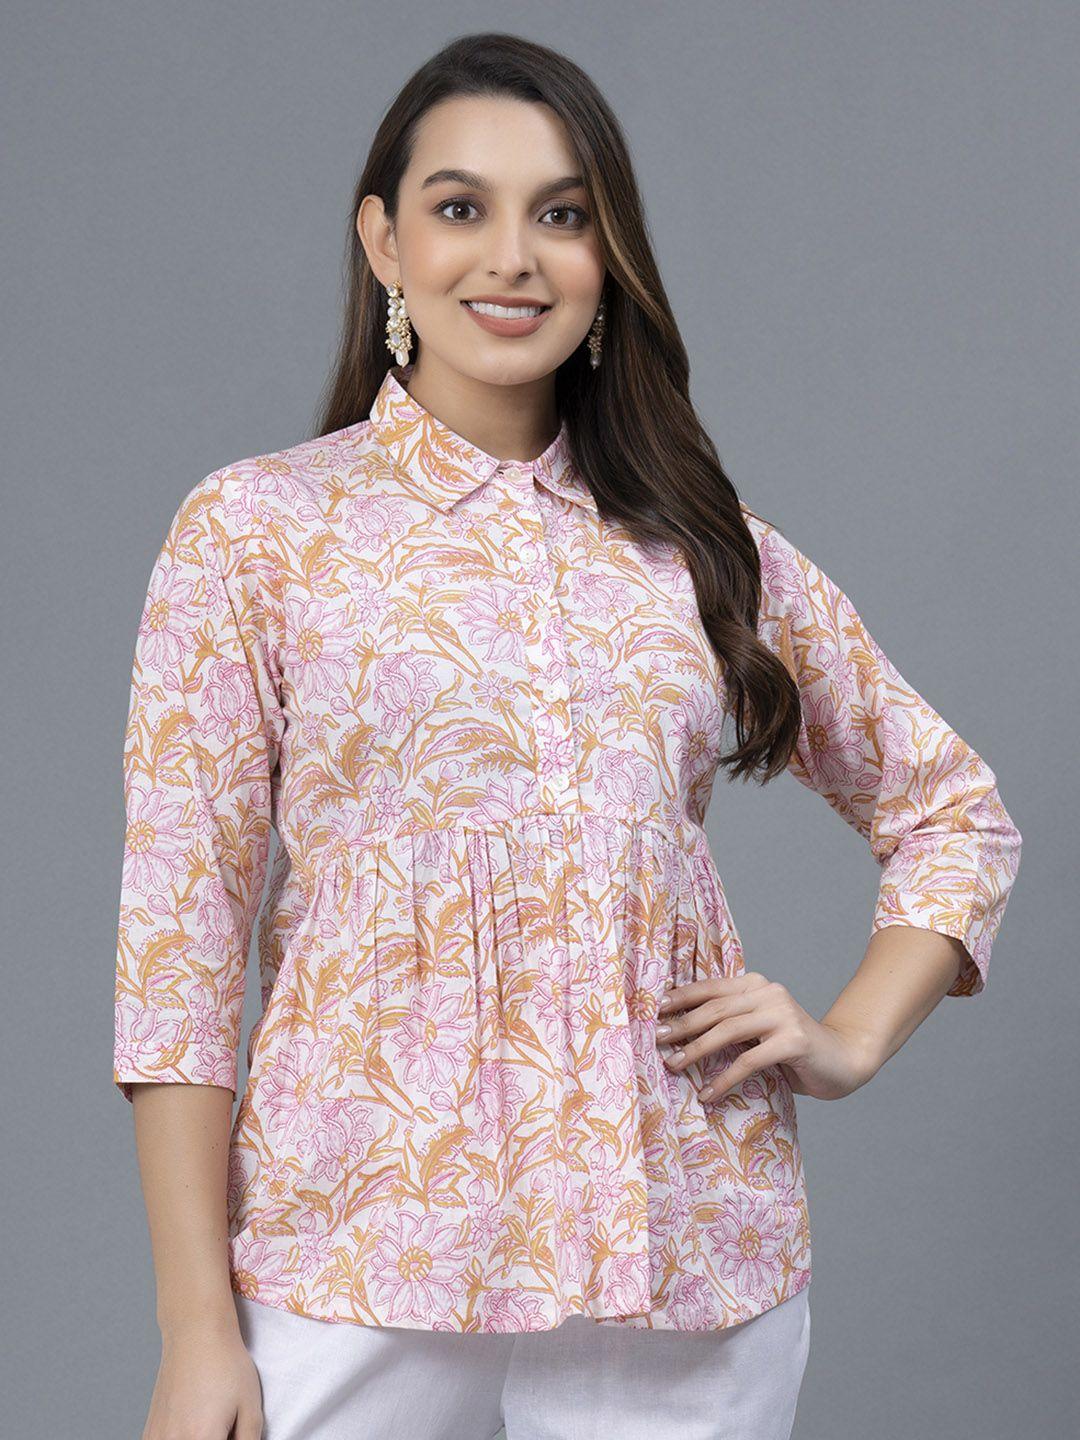 mode by red tape floral print pure cotton shirt style top